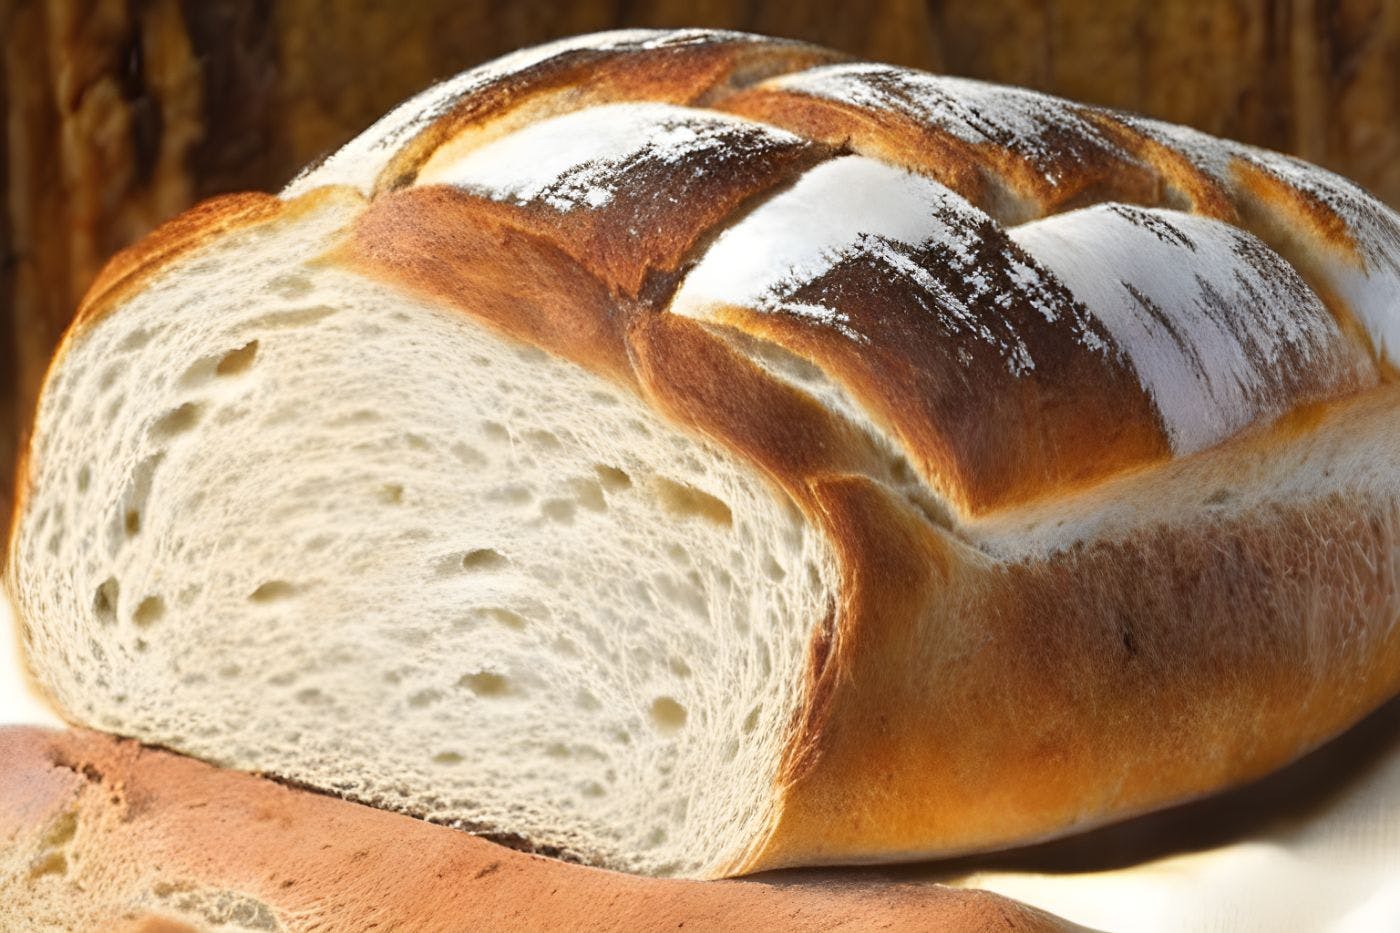 /insights-on-consumer-pricing-through-the-lens-of-bread feature image